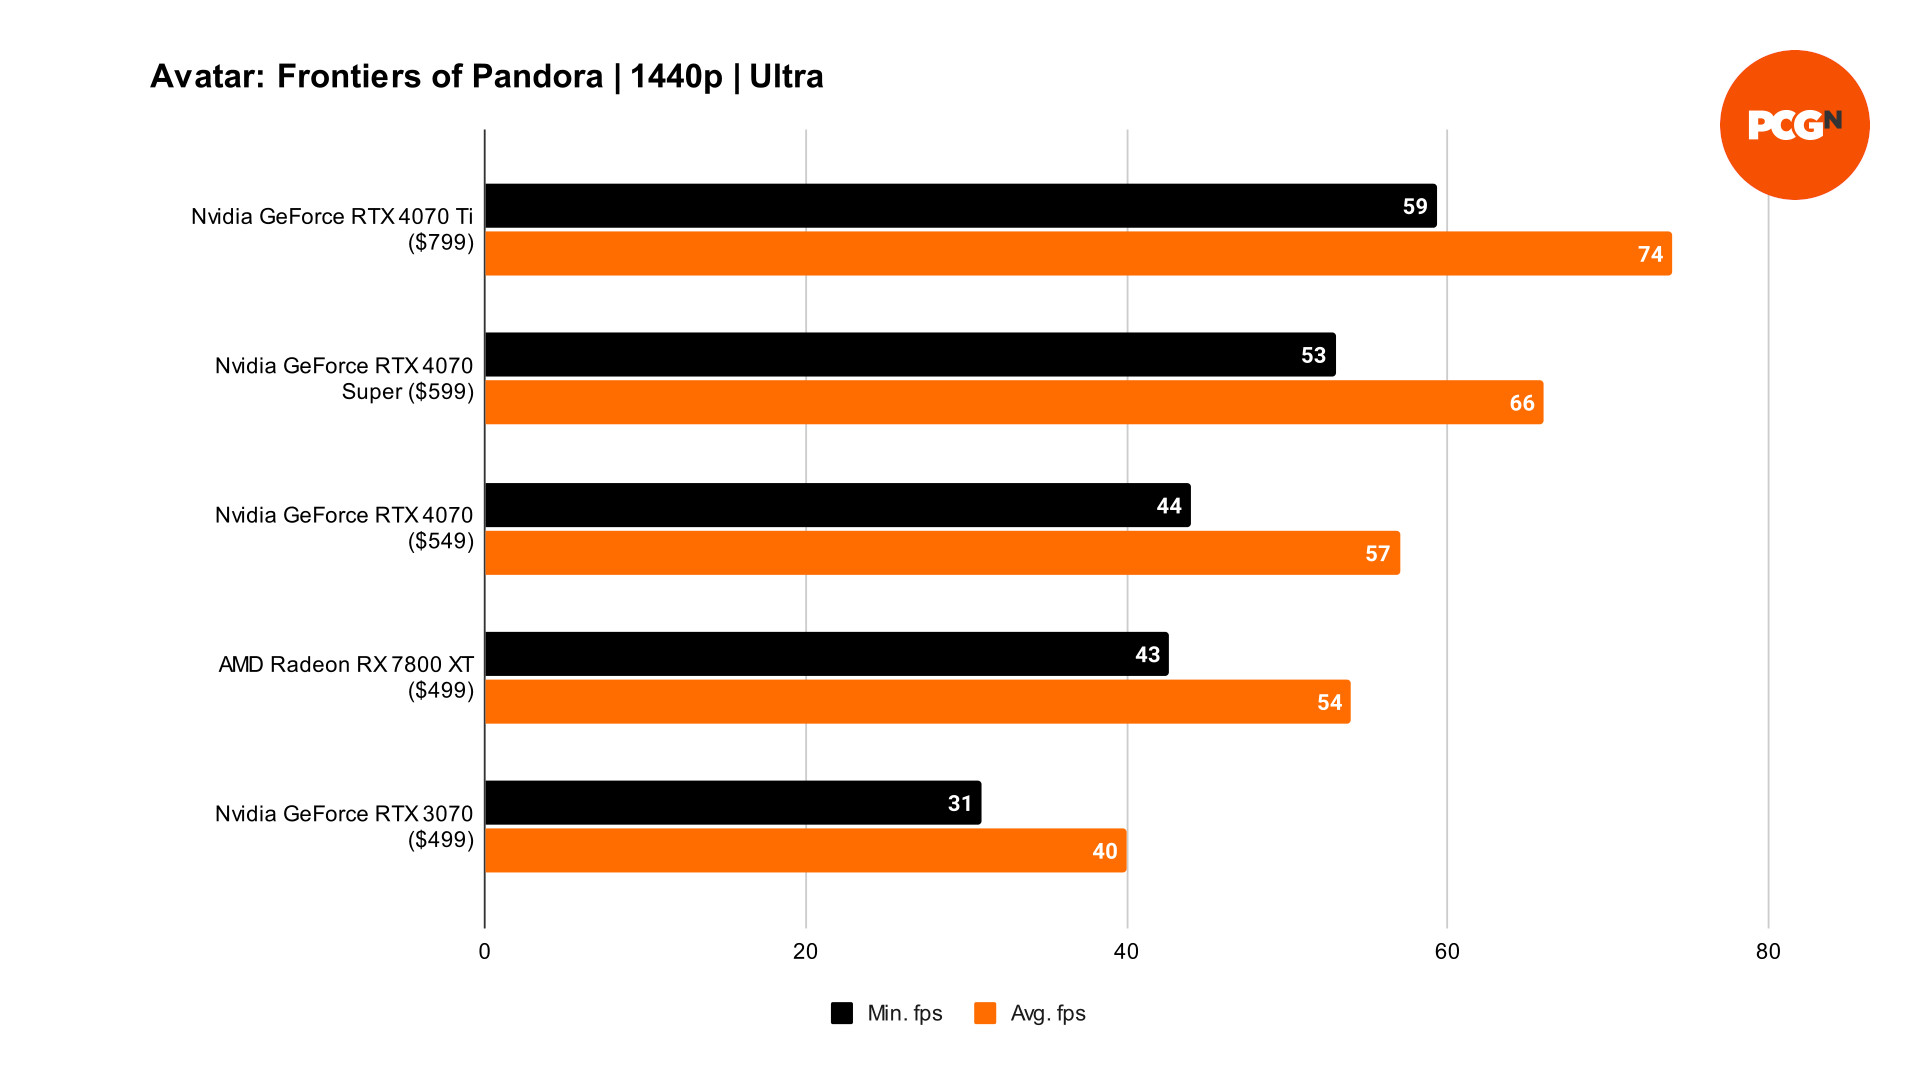 Nvidia GeForce RTX 4070 Super Avatar Frontiers of Pandora 1440p benchmarks